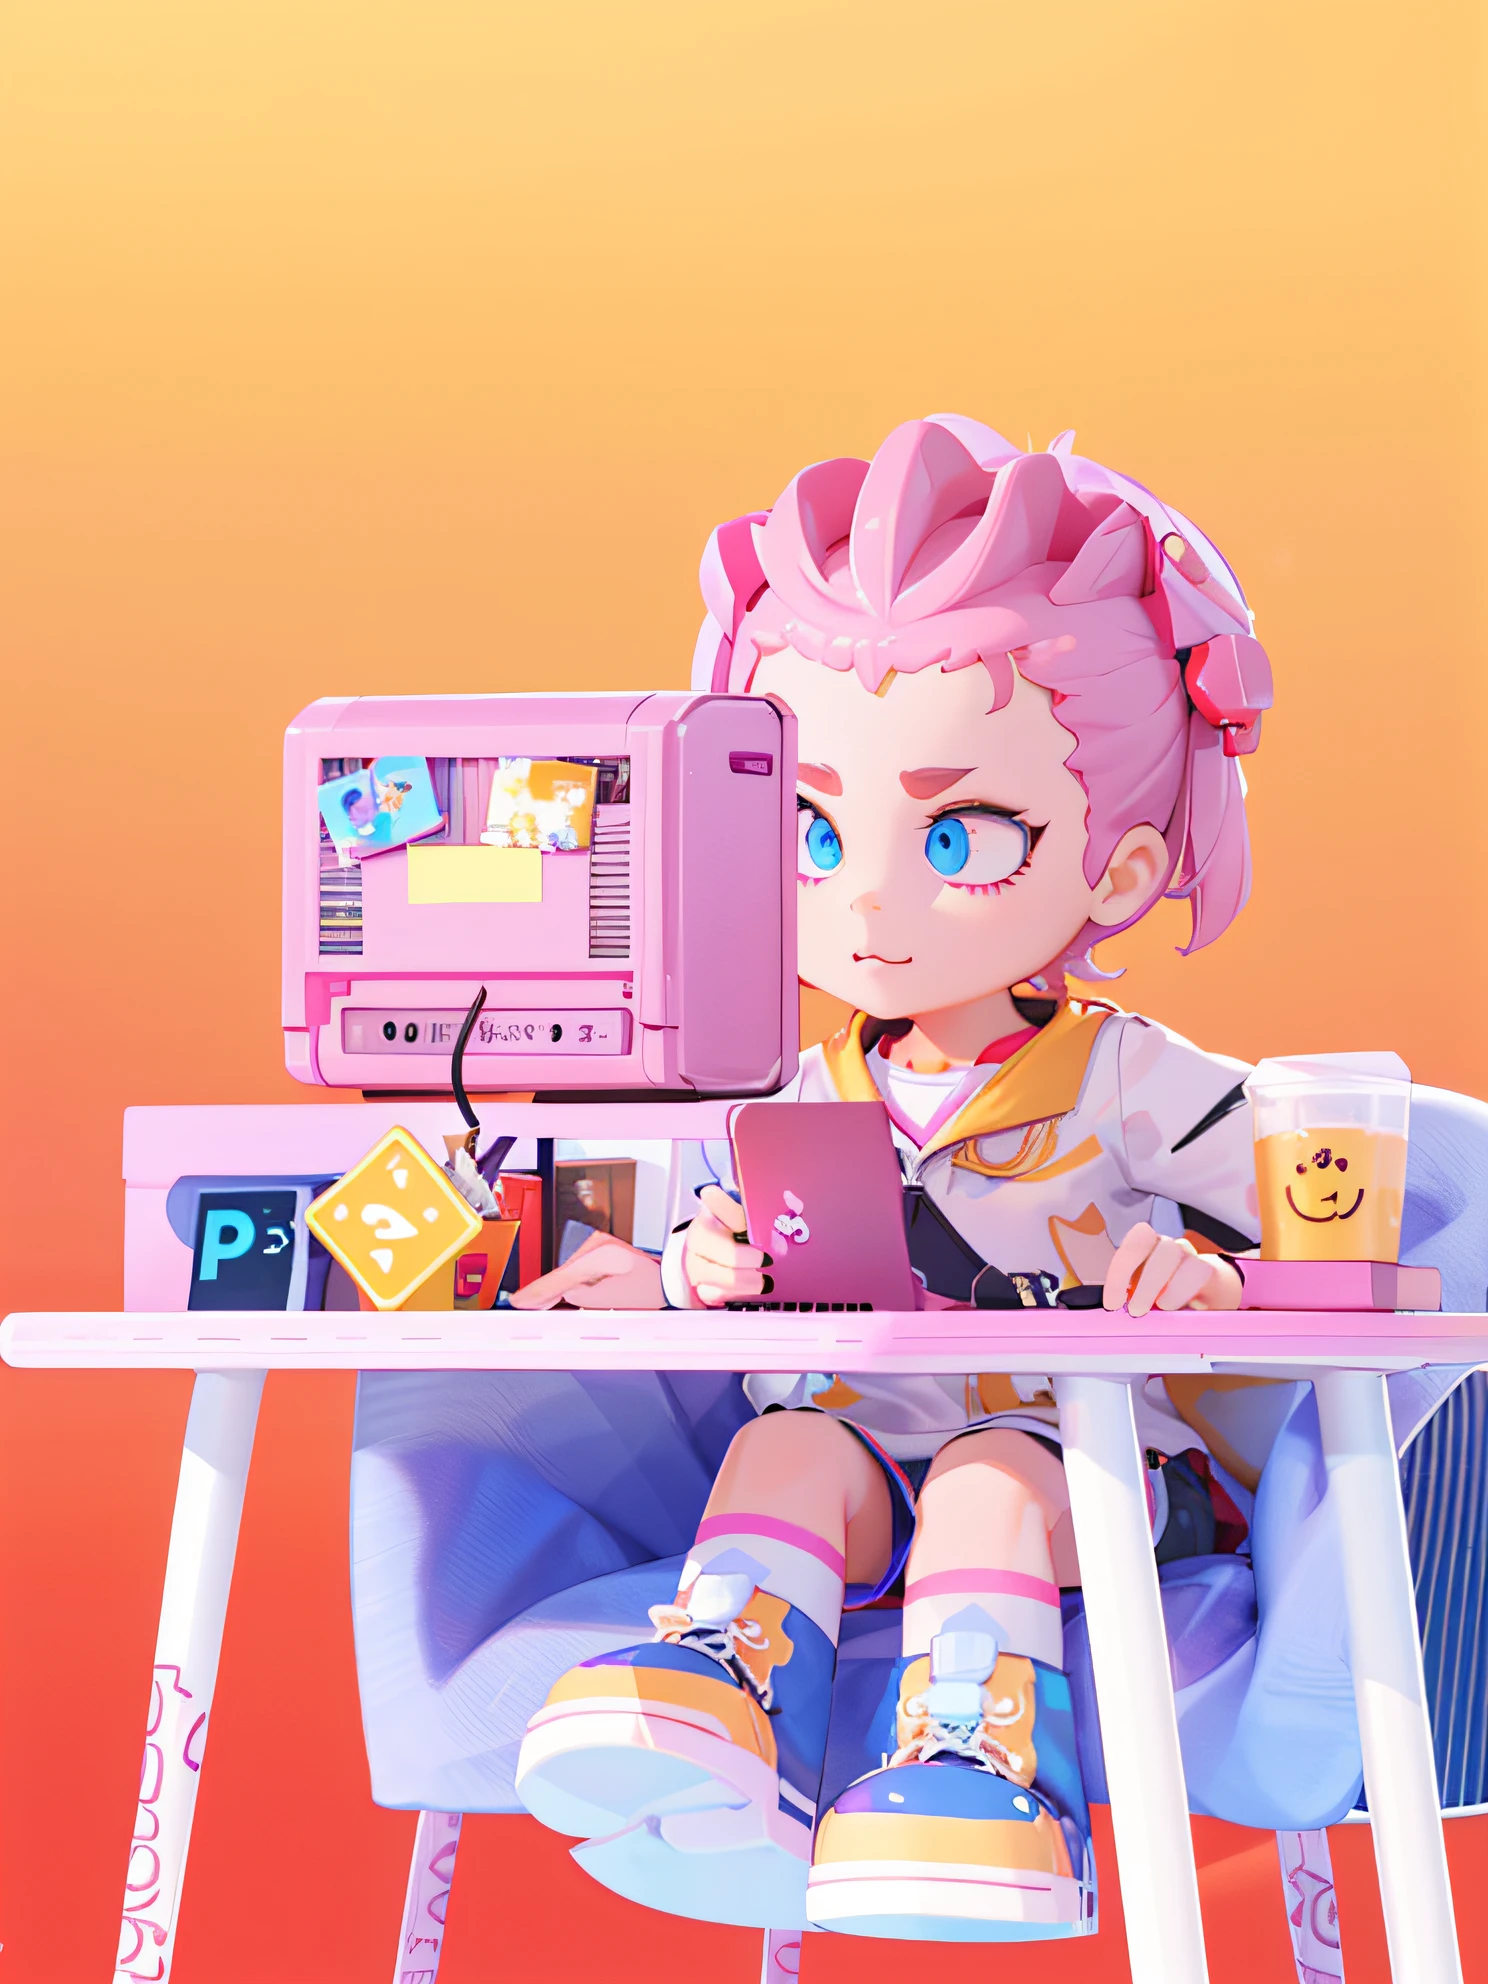 there is a small doll sitting at a desk with a laptop, cute 3 d render, animation style render, digital art render, 3 d illustration, 3d illustration, 2 d illustration, 2d illustration, pink iconic character, for hire 3d artist, stop motion character, kenny wong x pop mart, 3d grainy aesthetic illustration, 3d characters